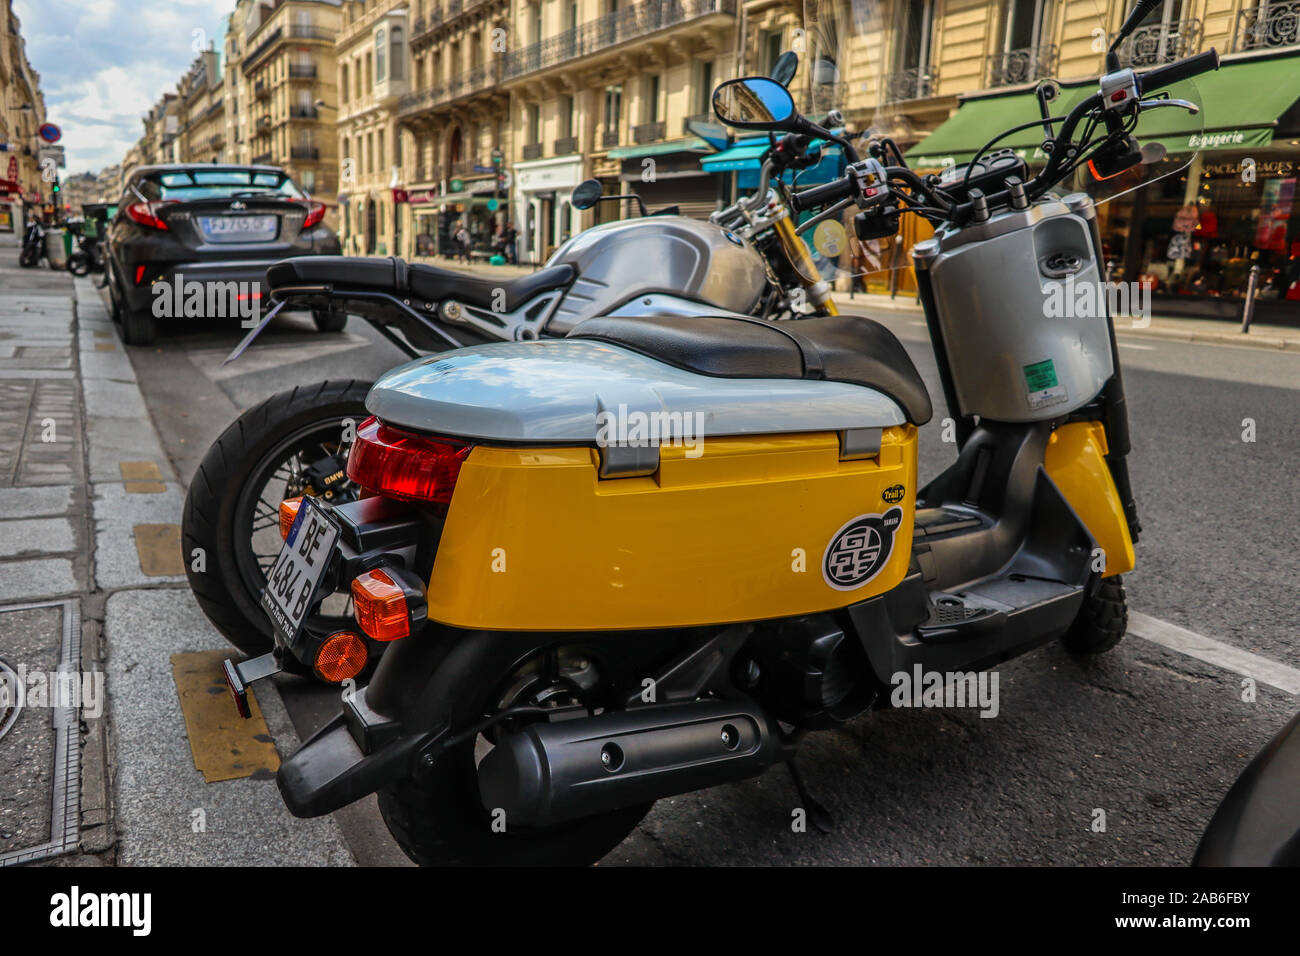 Yamaha Giggle Scooter parked road in Paris, Europe Stock Photo - Alamy